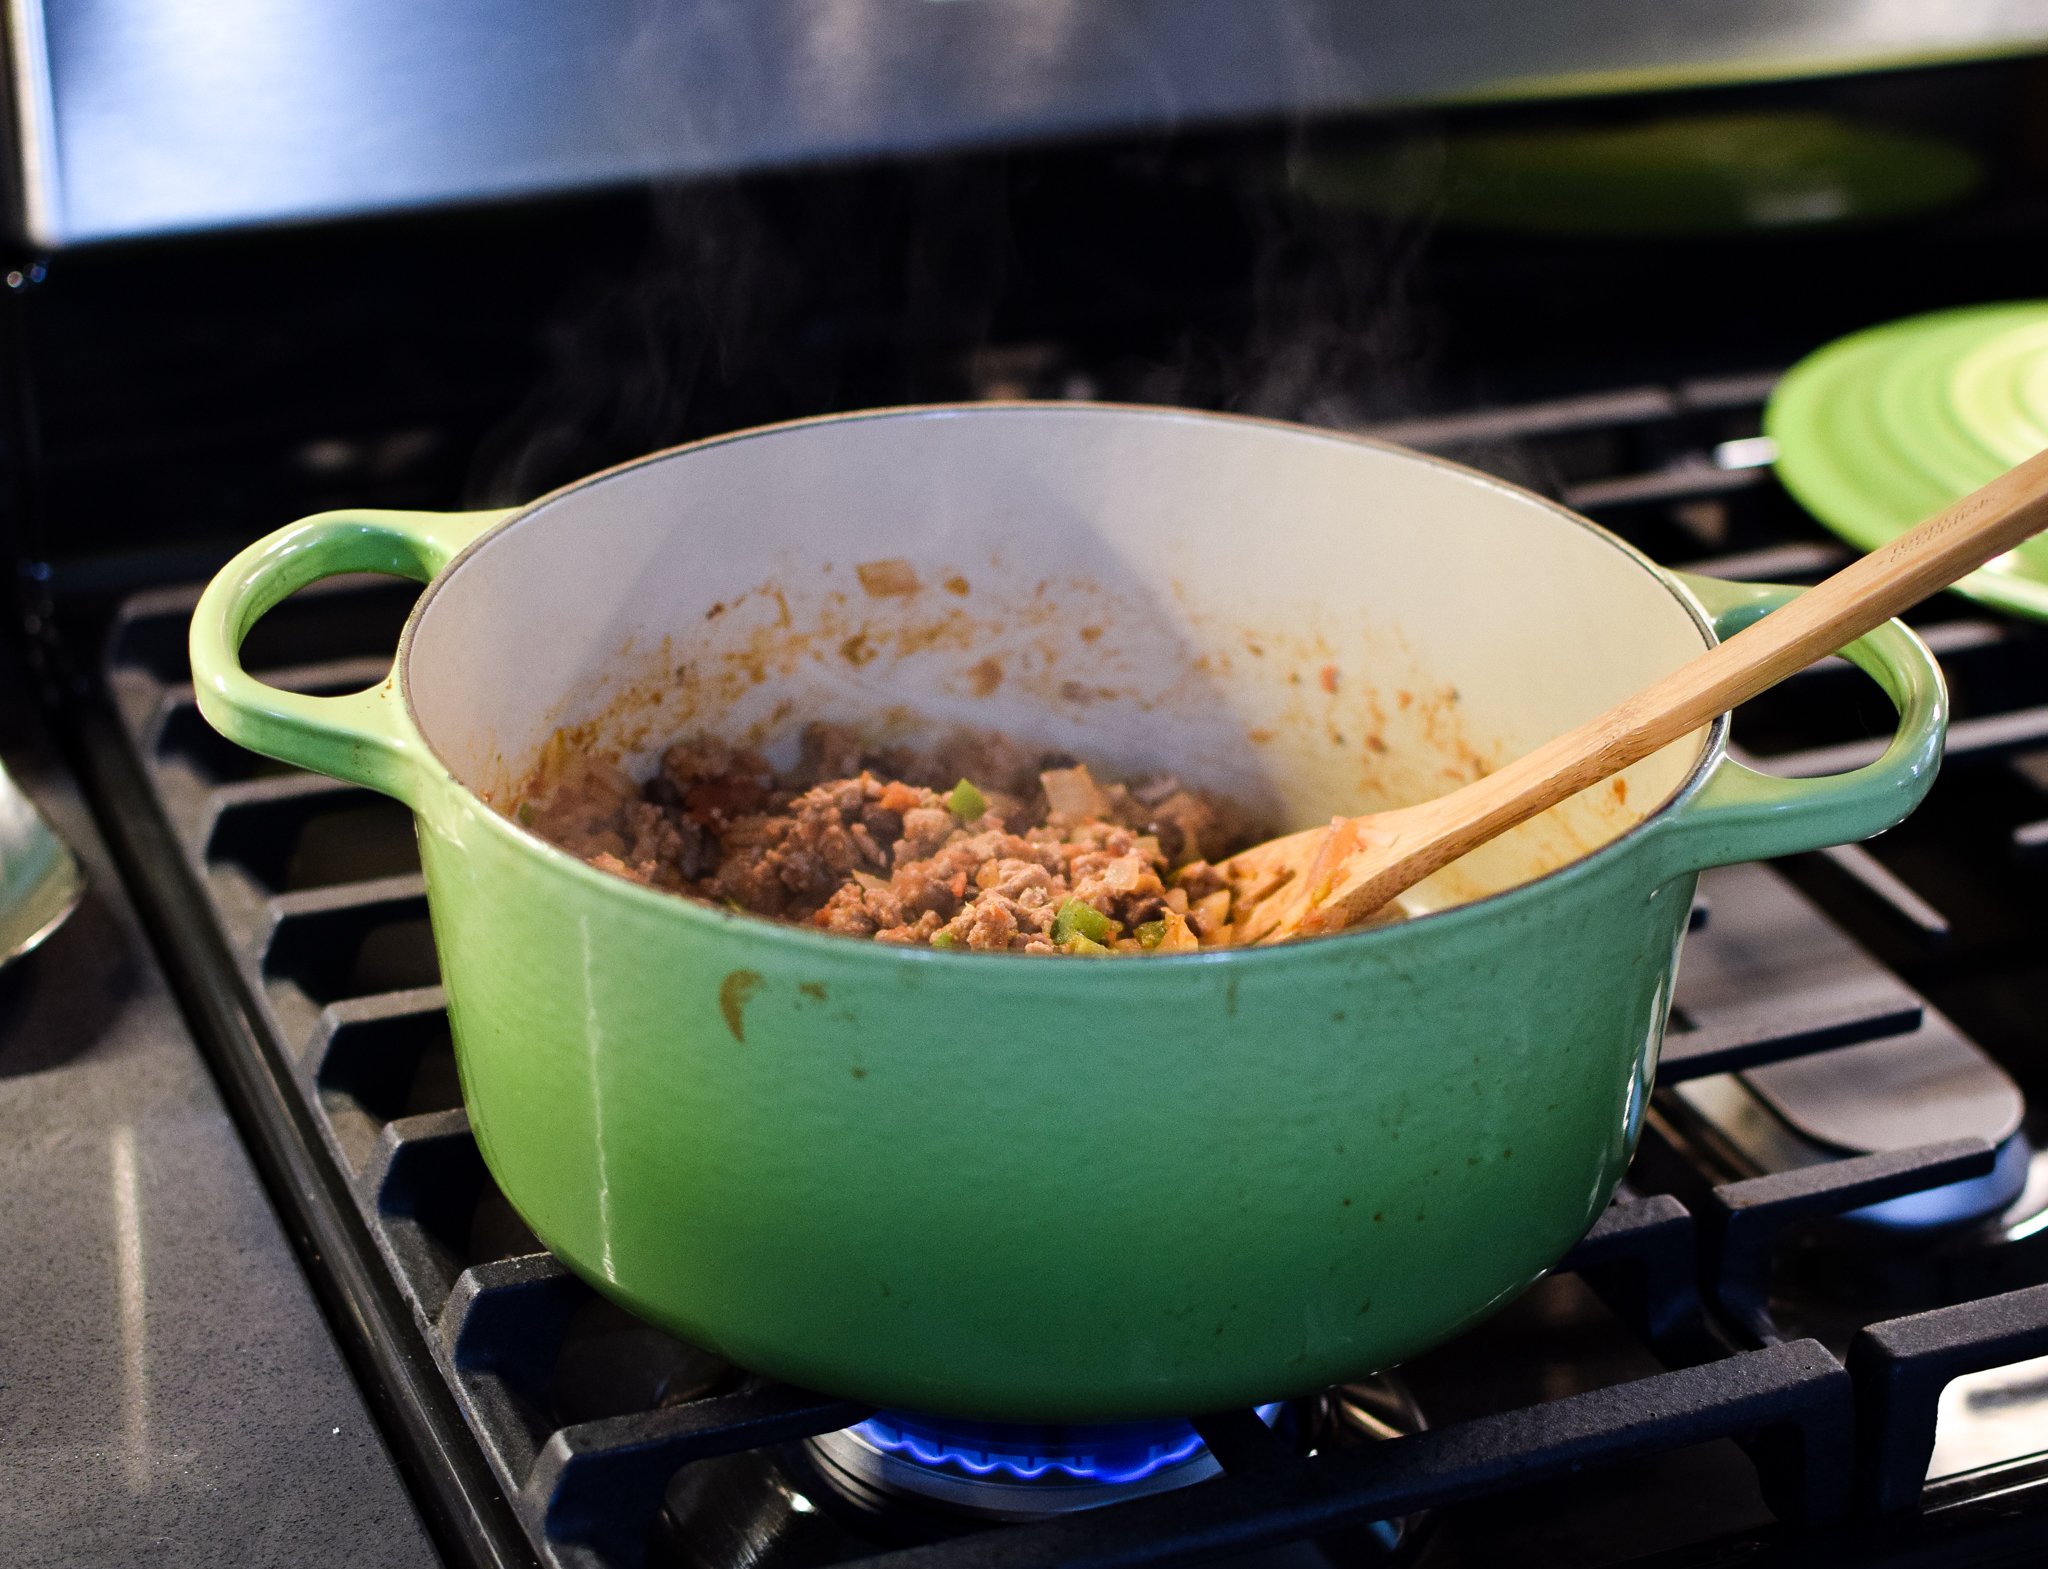 Cooking ground turkey that can be used in multiple meals.